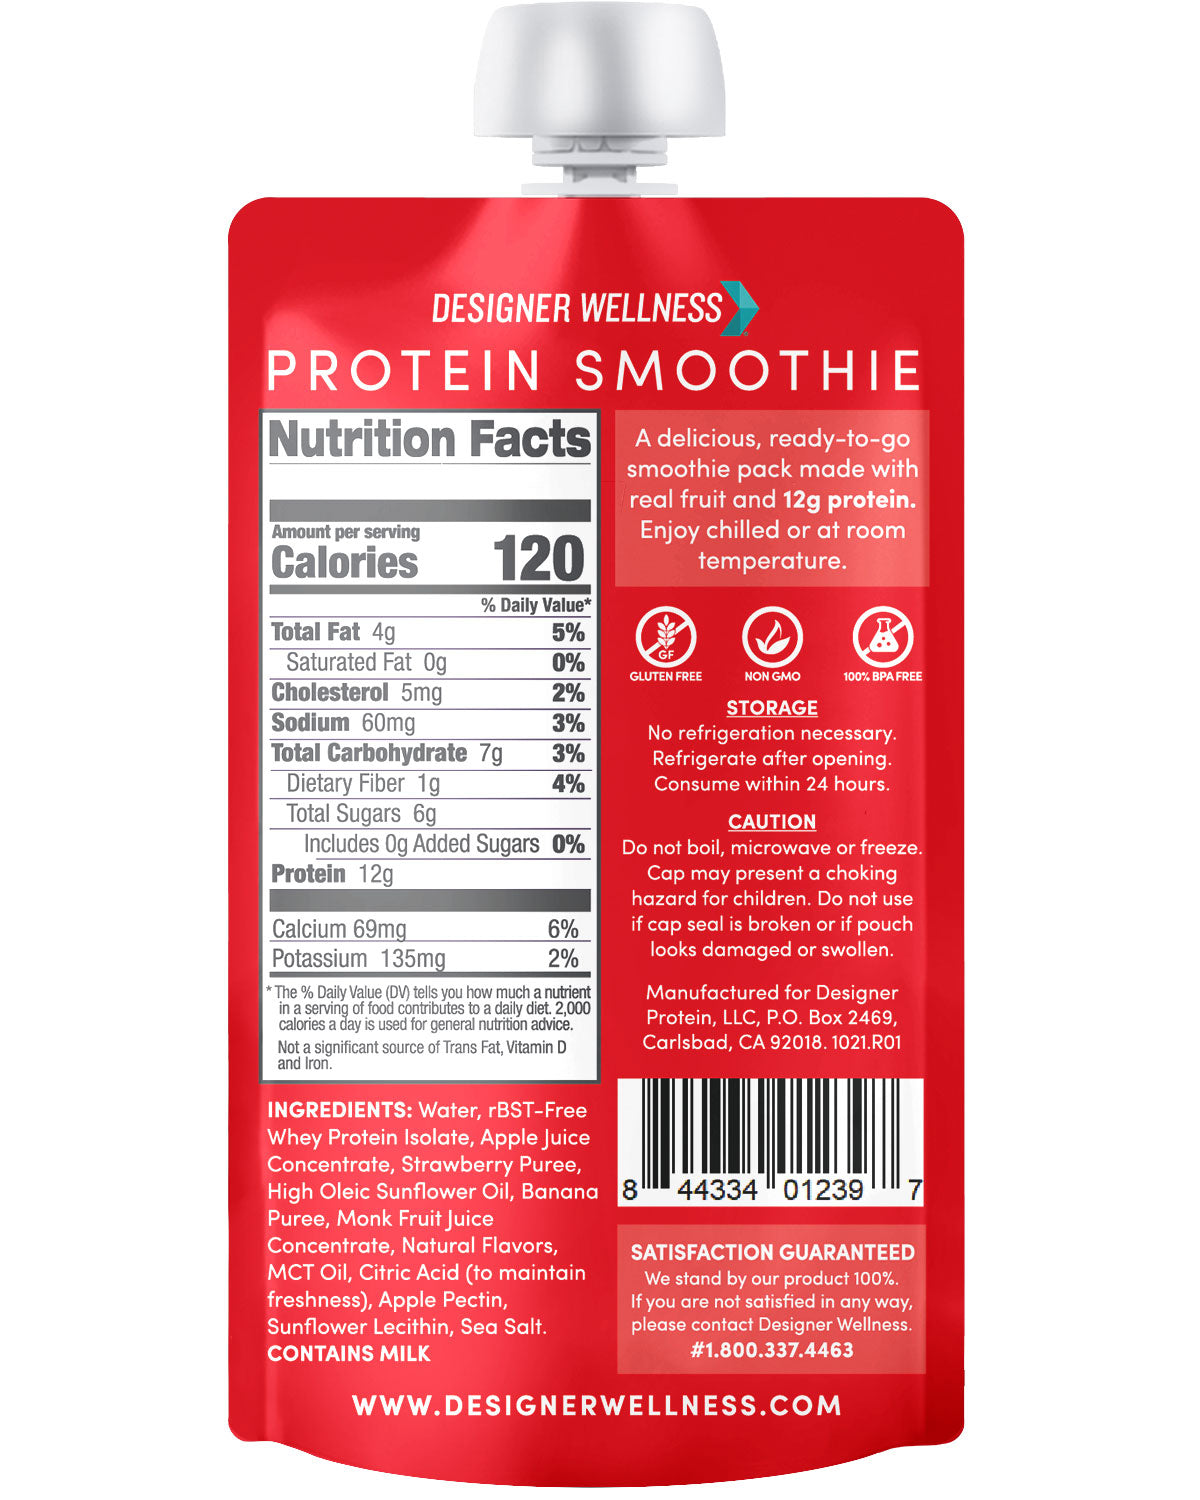 Protein Smoothie - Strawberry Banana and Tropical 24 pack - Designer Wellness (7679947374818)